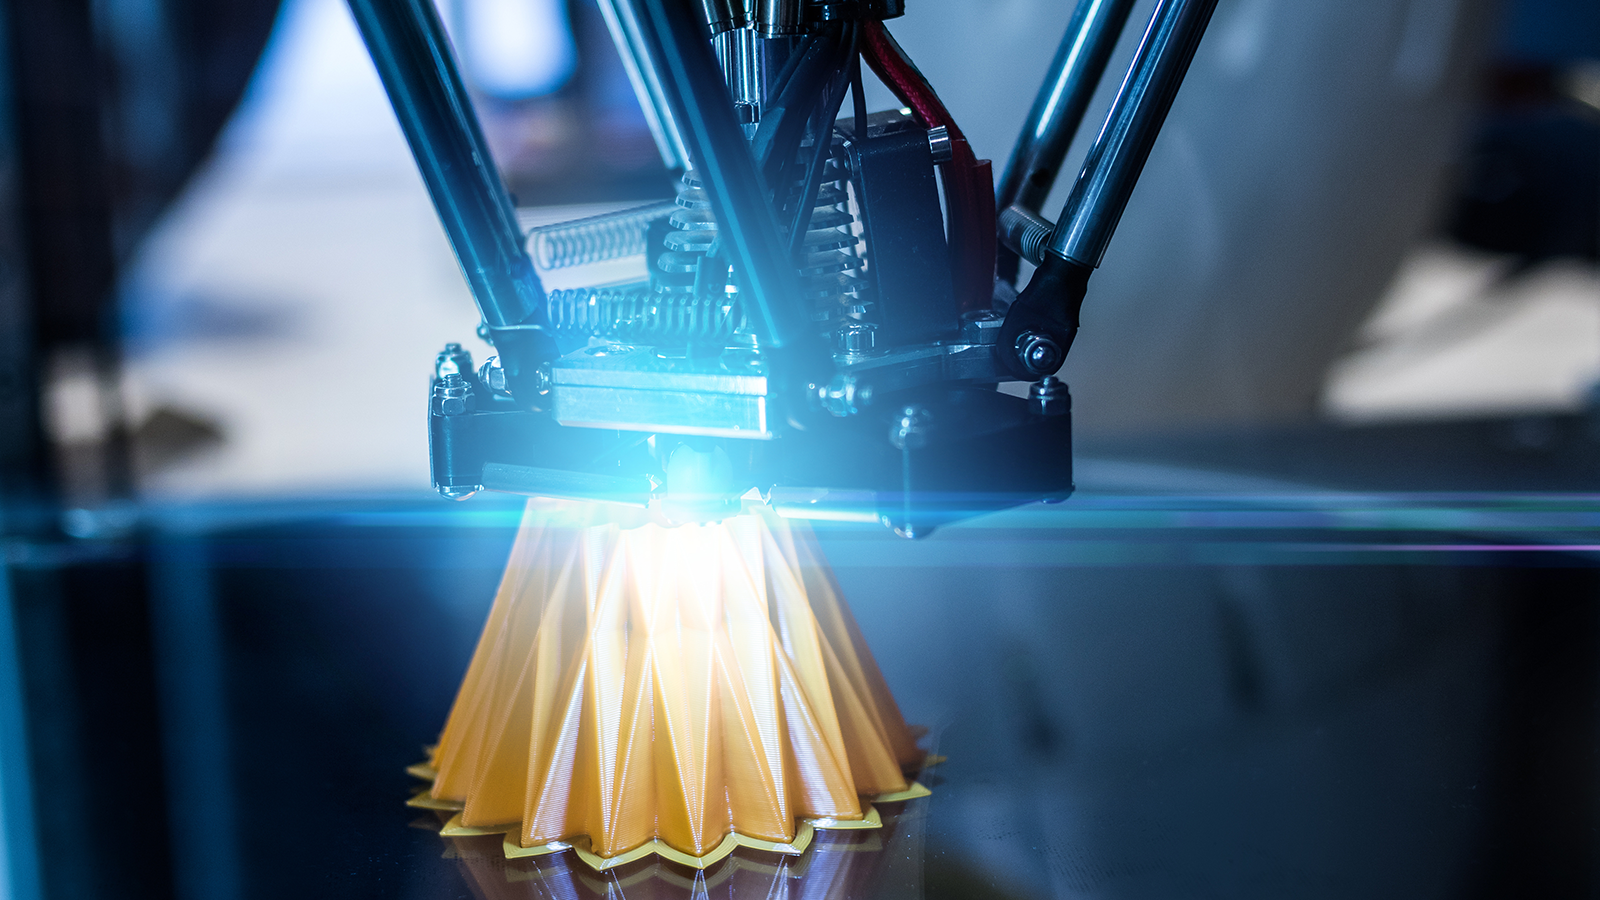 How 3D Printing is Rapidly Revolutionizing Manufacturing, Warehousing, and Logistics